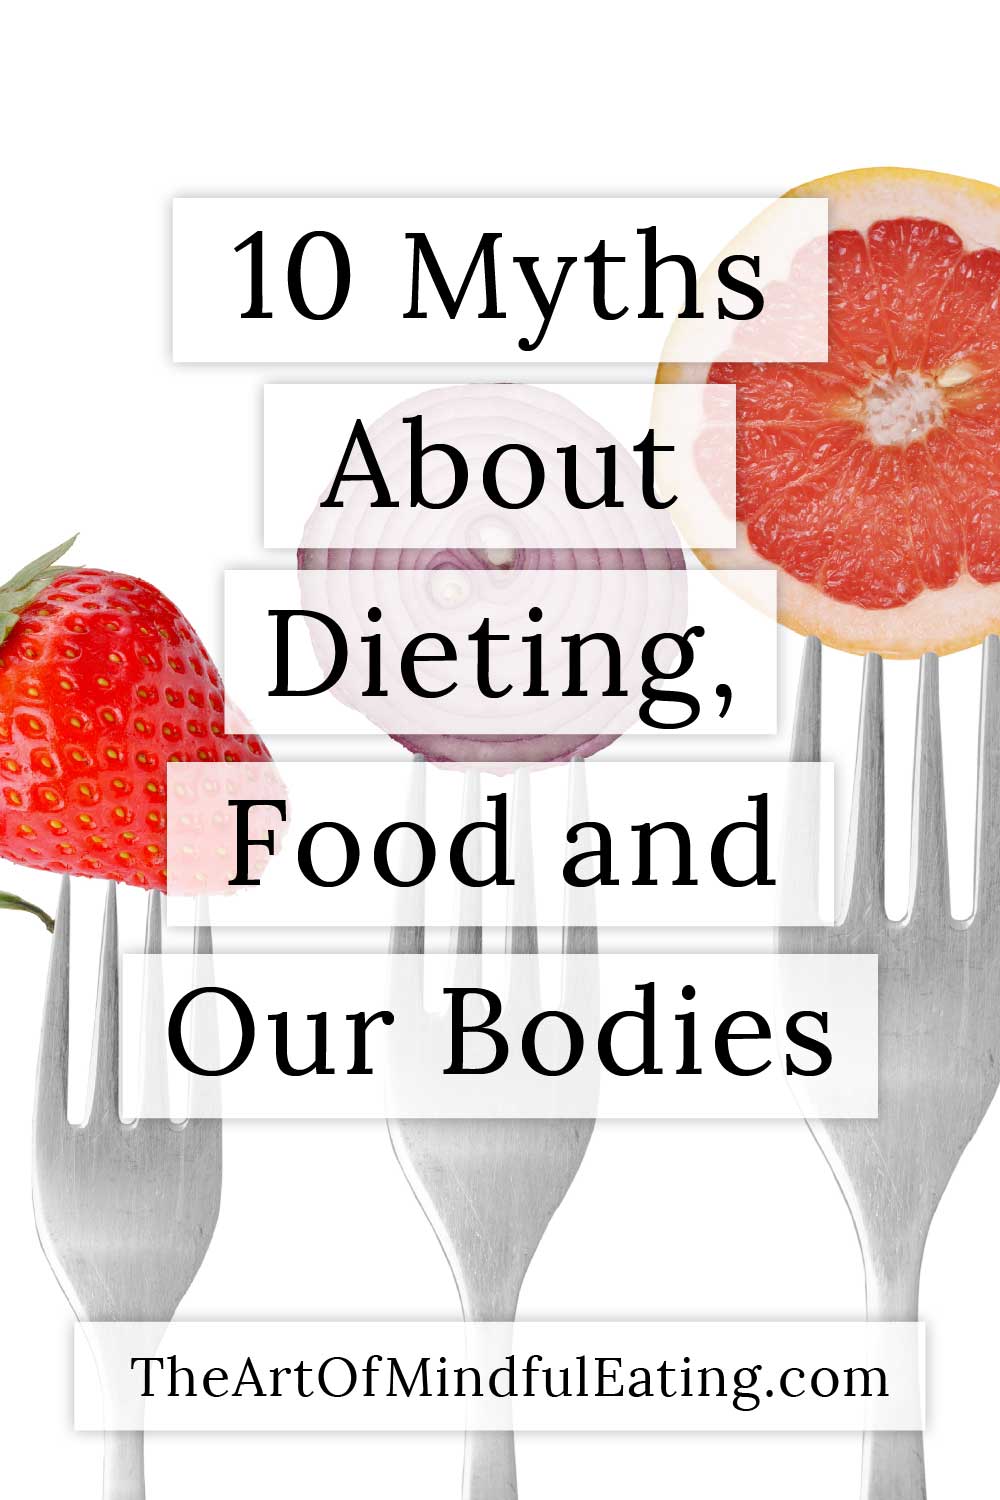 10 Myths About Dieting, Food and Our Bodies | Xen and the Art of ...